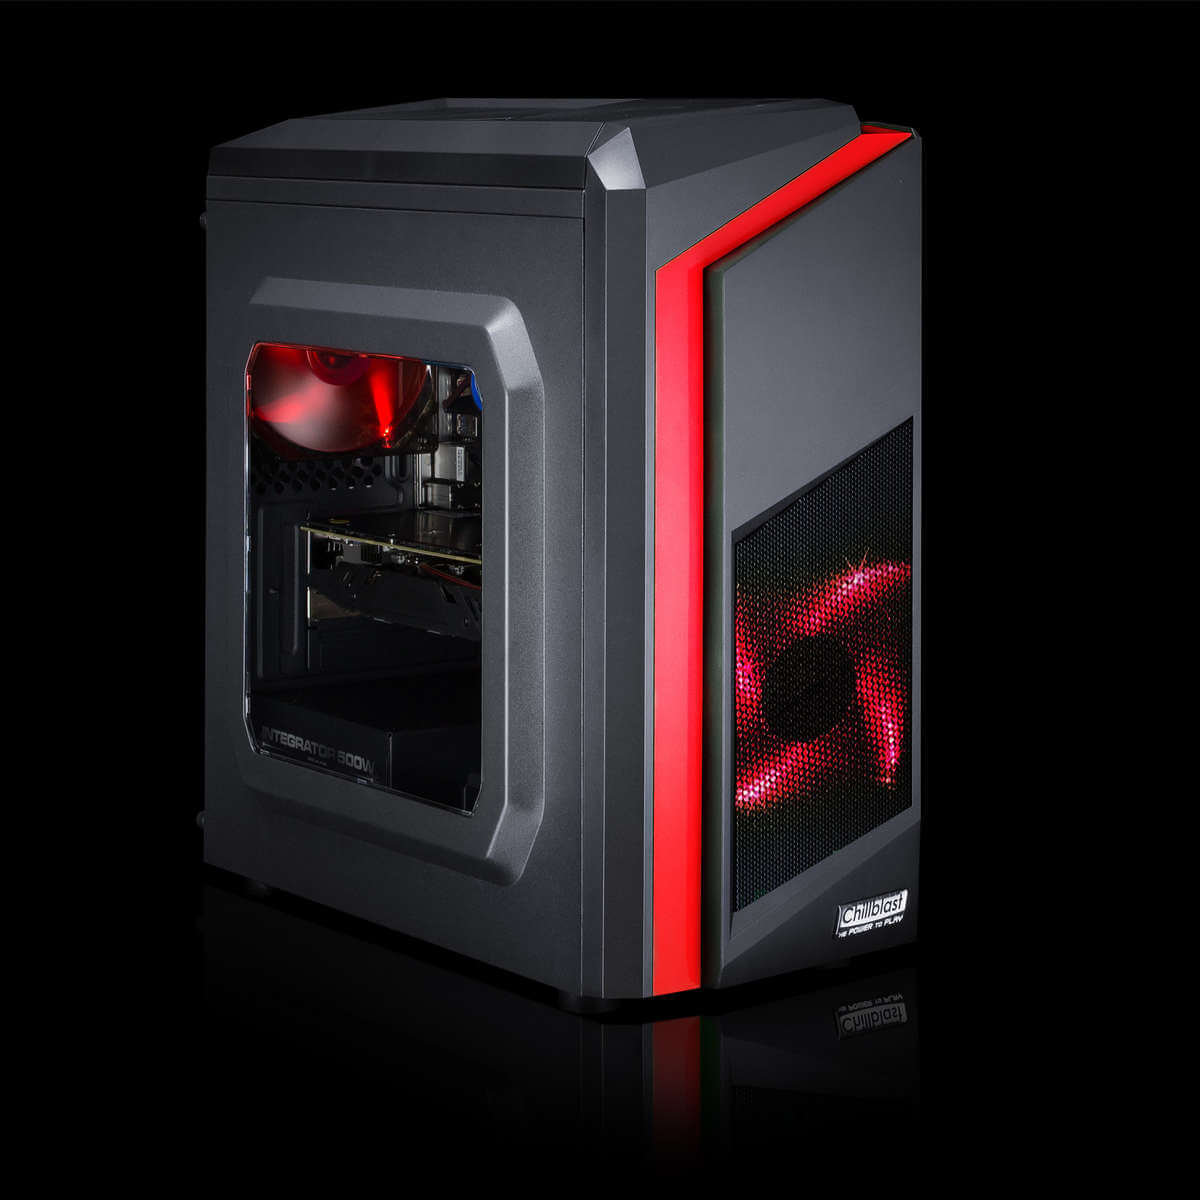 Image of the Chillblast Fusion Imp Gaming PC in front of a dark background.